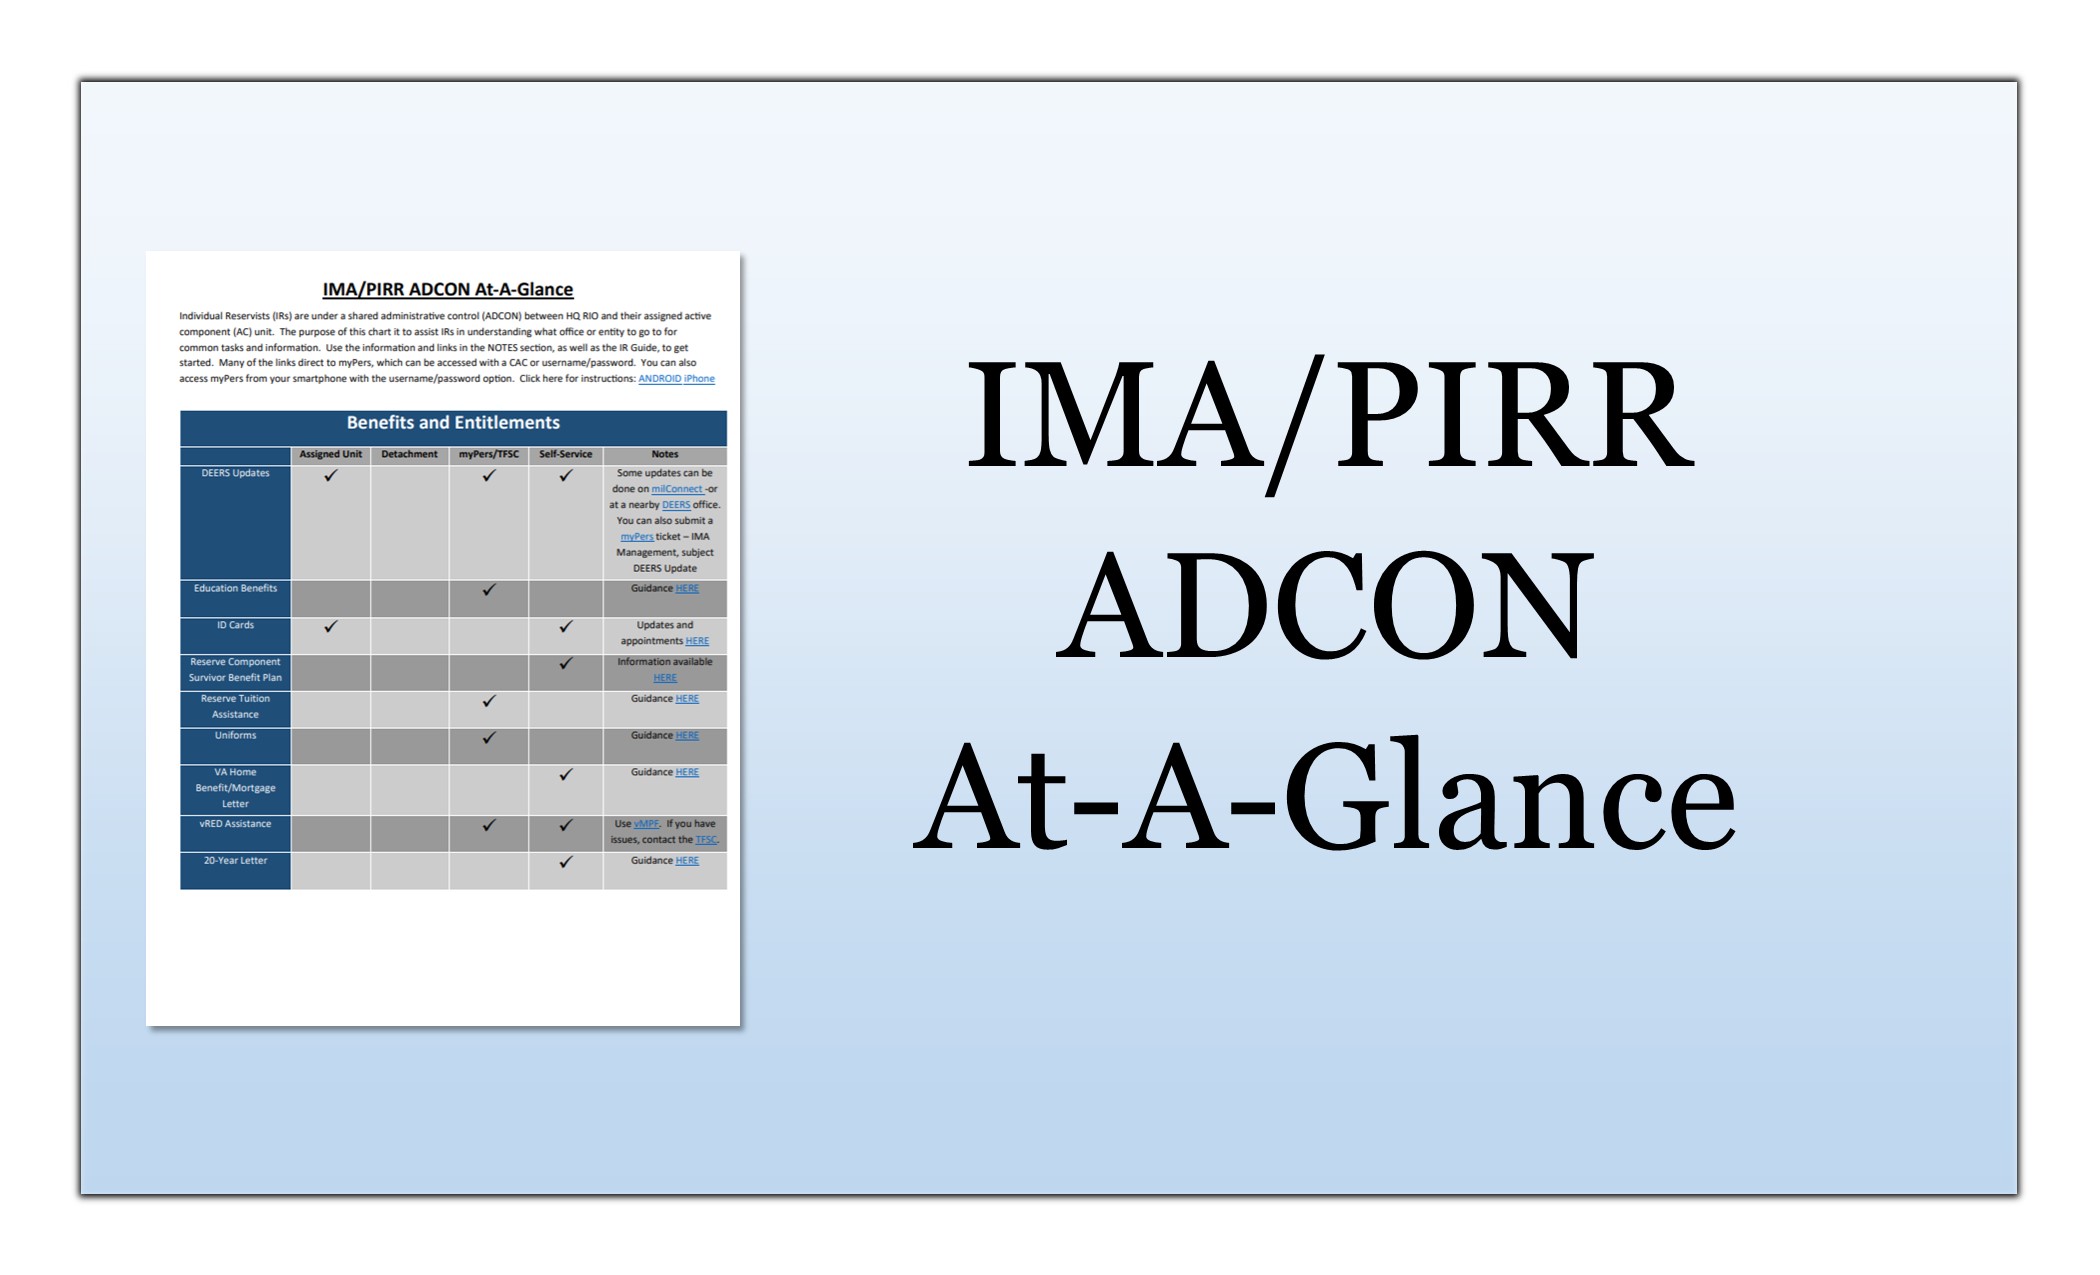 IMA PIRR at-a-glance thumbnail link